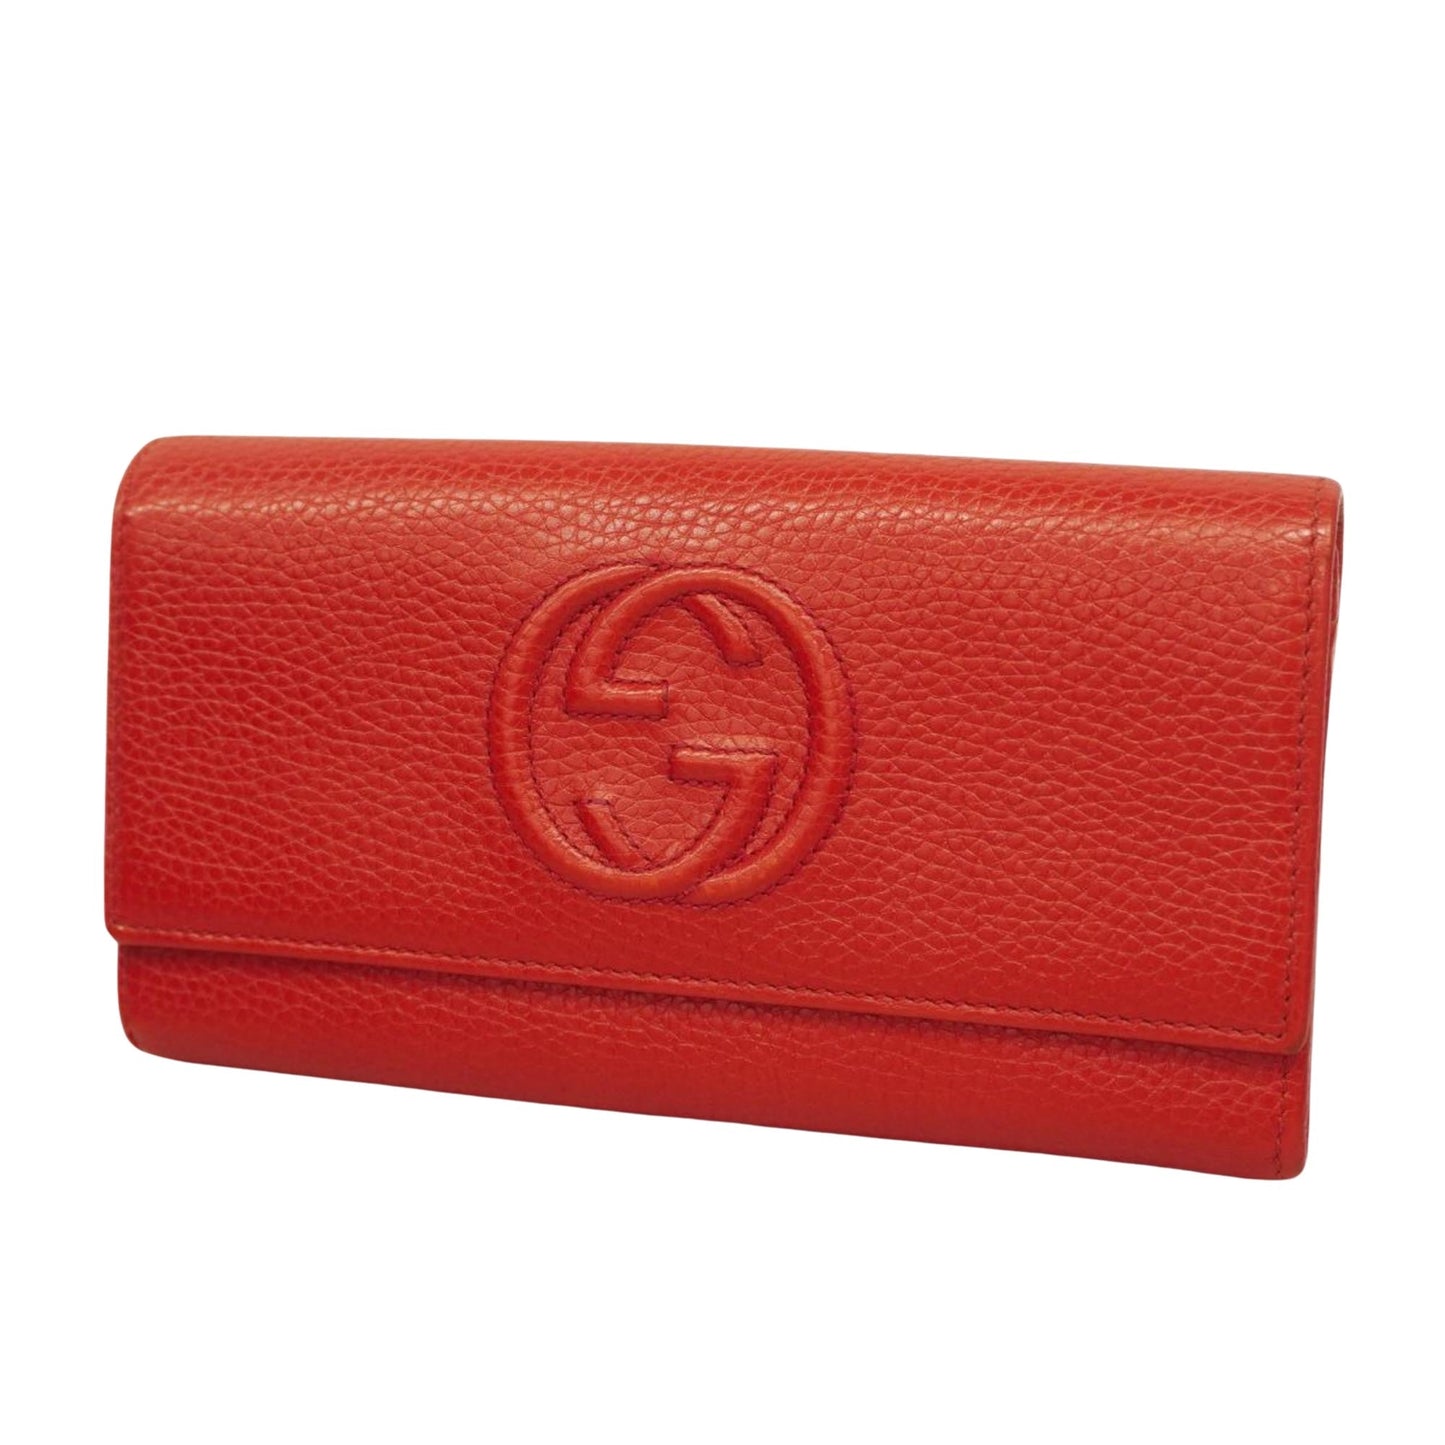 Gucci Soho Red Leather Wallet  (Pre-Owned)